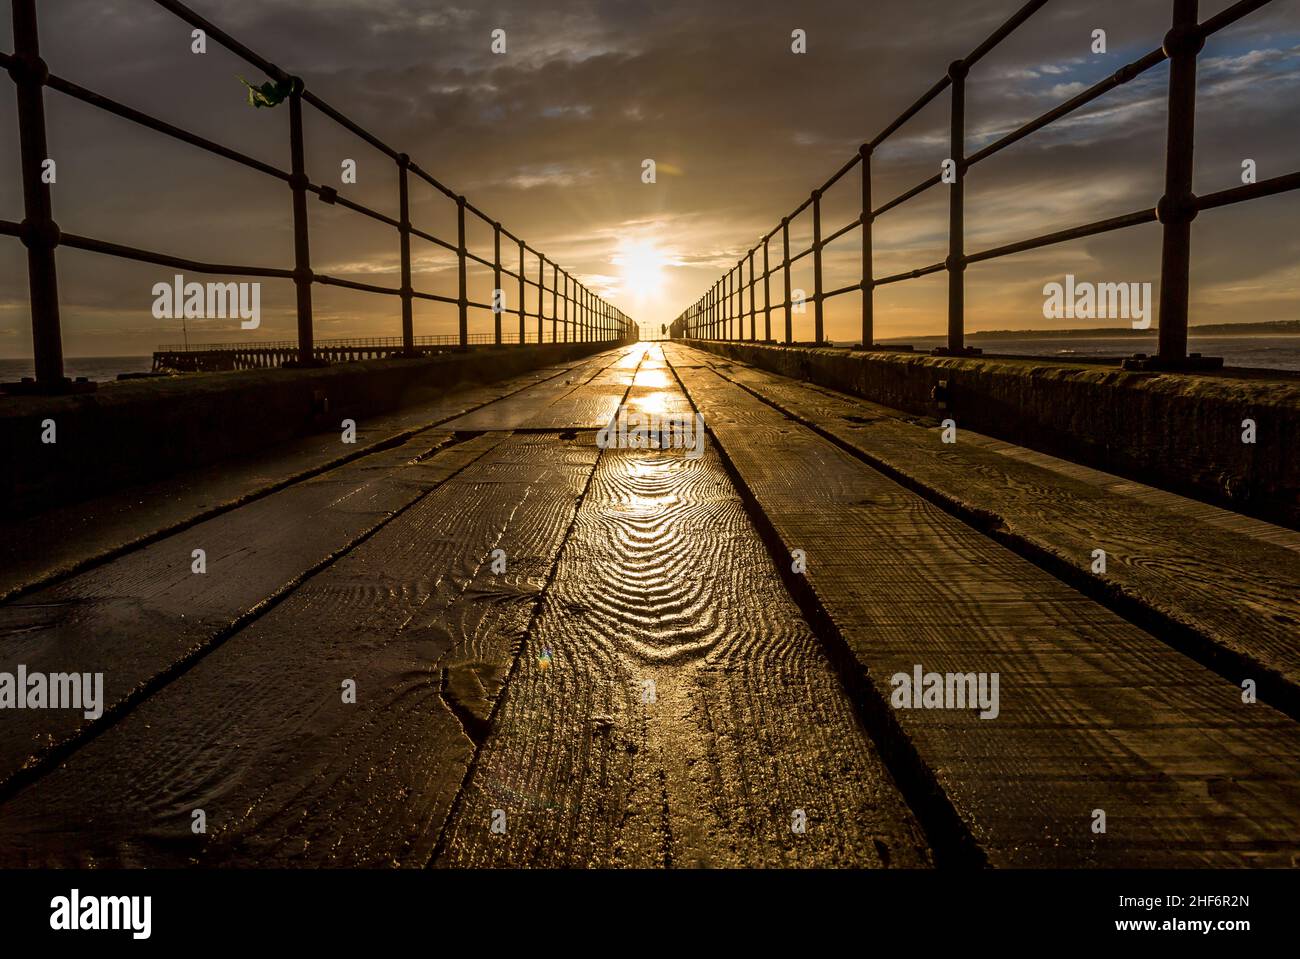 A close-up of a textured wooden plank on the old wooden Pier stretching out to the North Sea during a glorious morning at Blyth beach Stock Photo